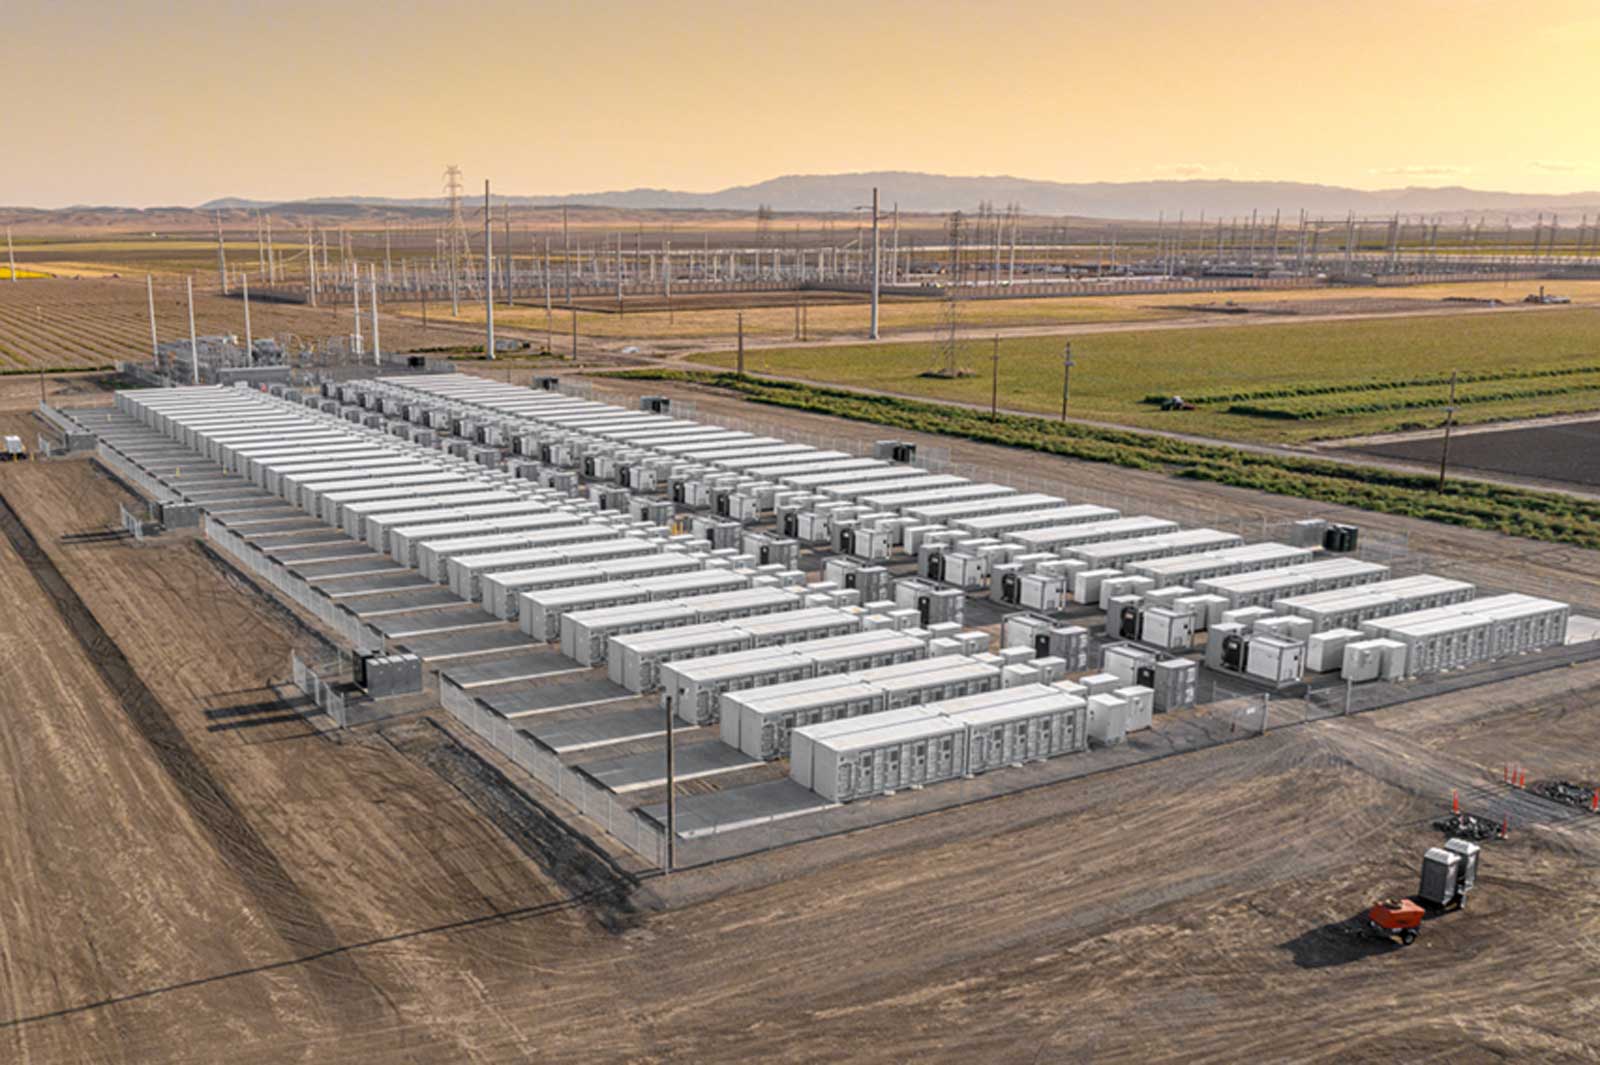 https://americas.rwe.com/-/media/RWE/RWE-USA/images/press/2023-06-14-rwe-connects-its-first-utility-scale-battery-storage-project-to-the-california-grid.jpg?db=web&mw=1920&w=2160&hash=C87A20988C0811D5BD2714326AA296D8